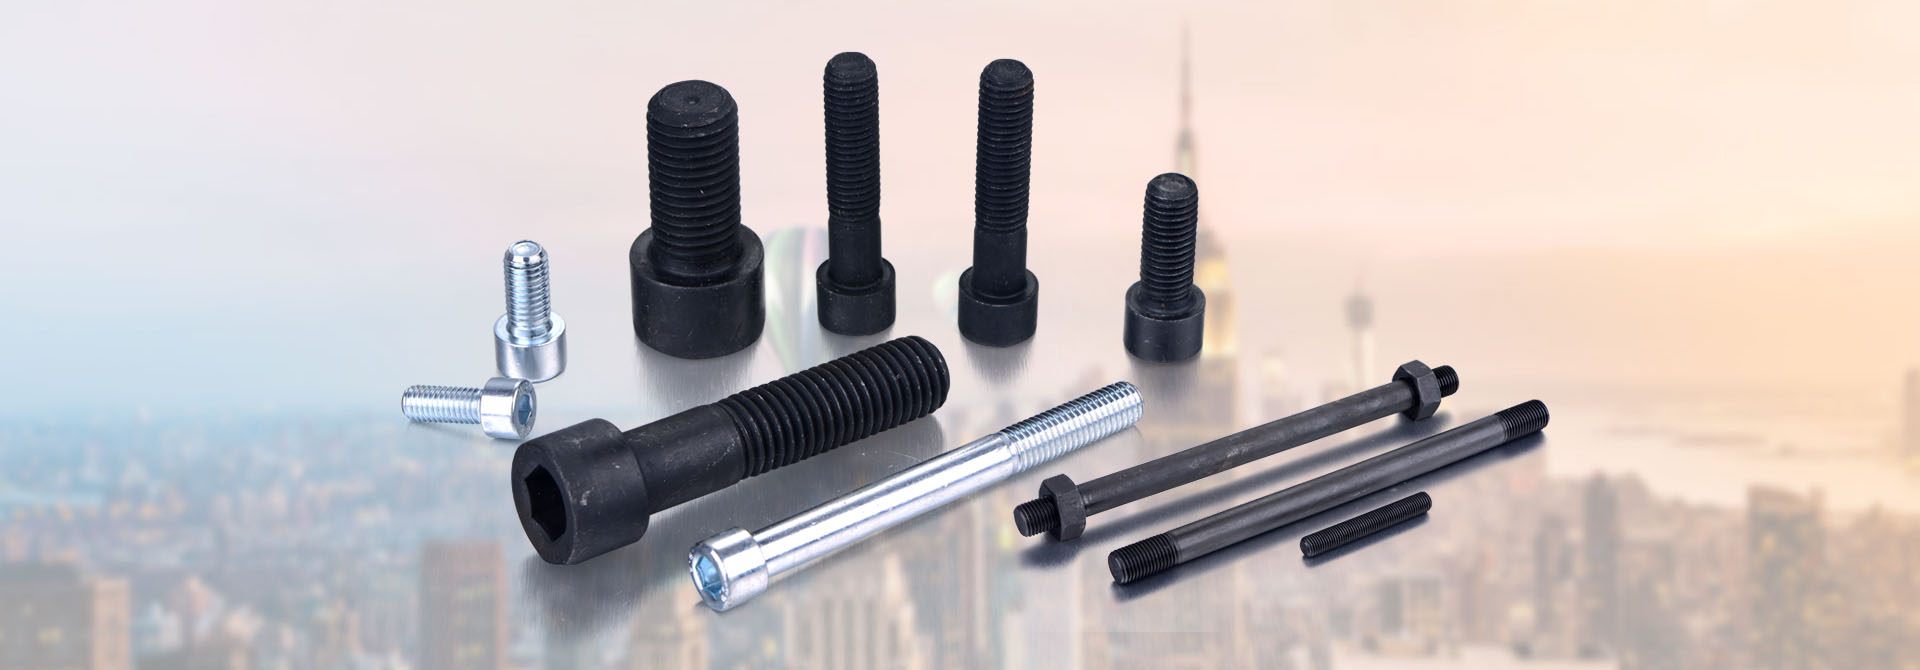 Ningbo Taida Fastener Manufacture CO.,LTD. is specialized in manufacturing stud bolts, threaded ro